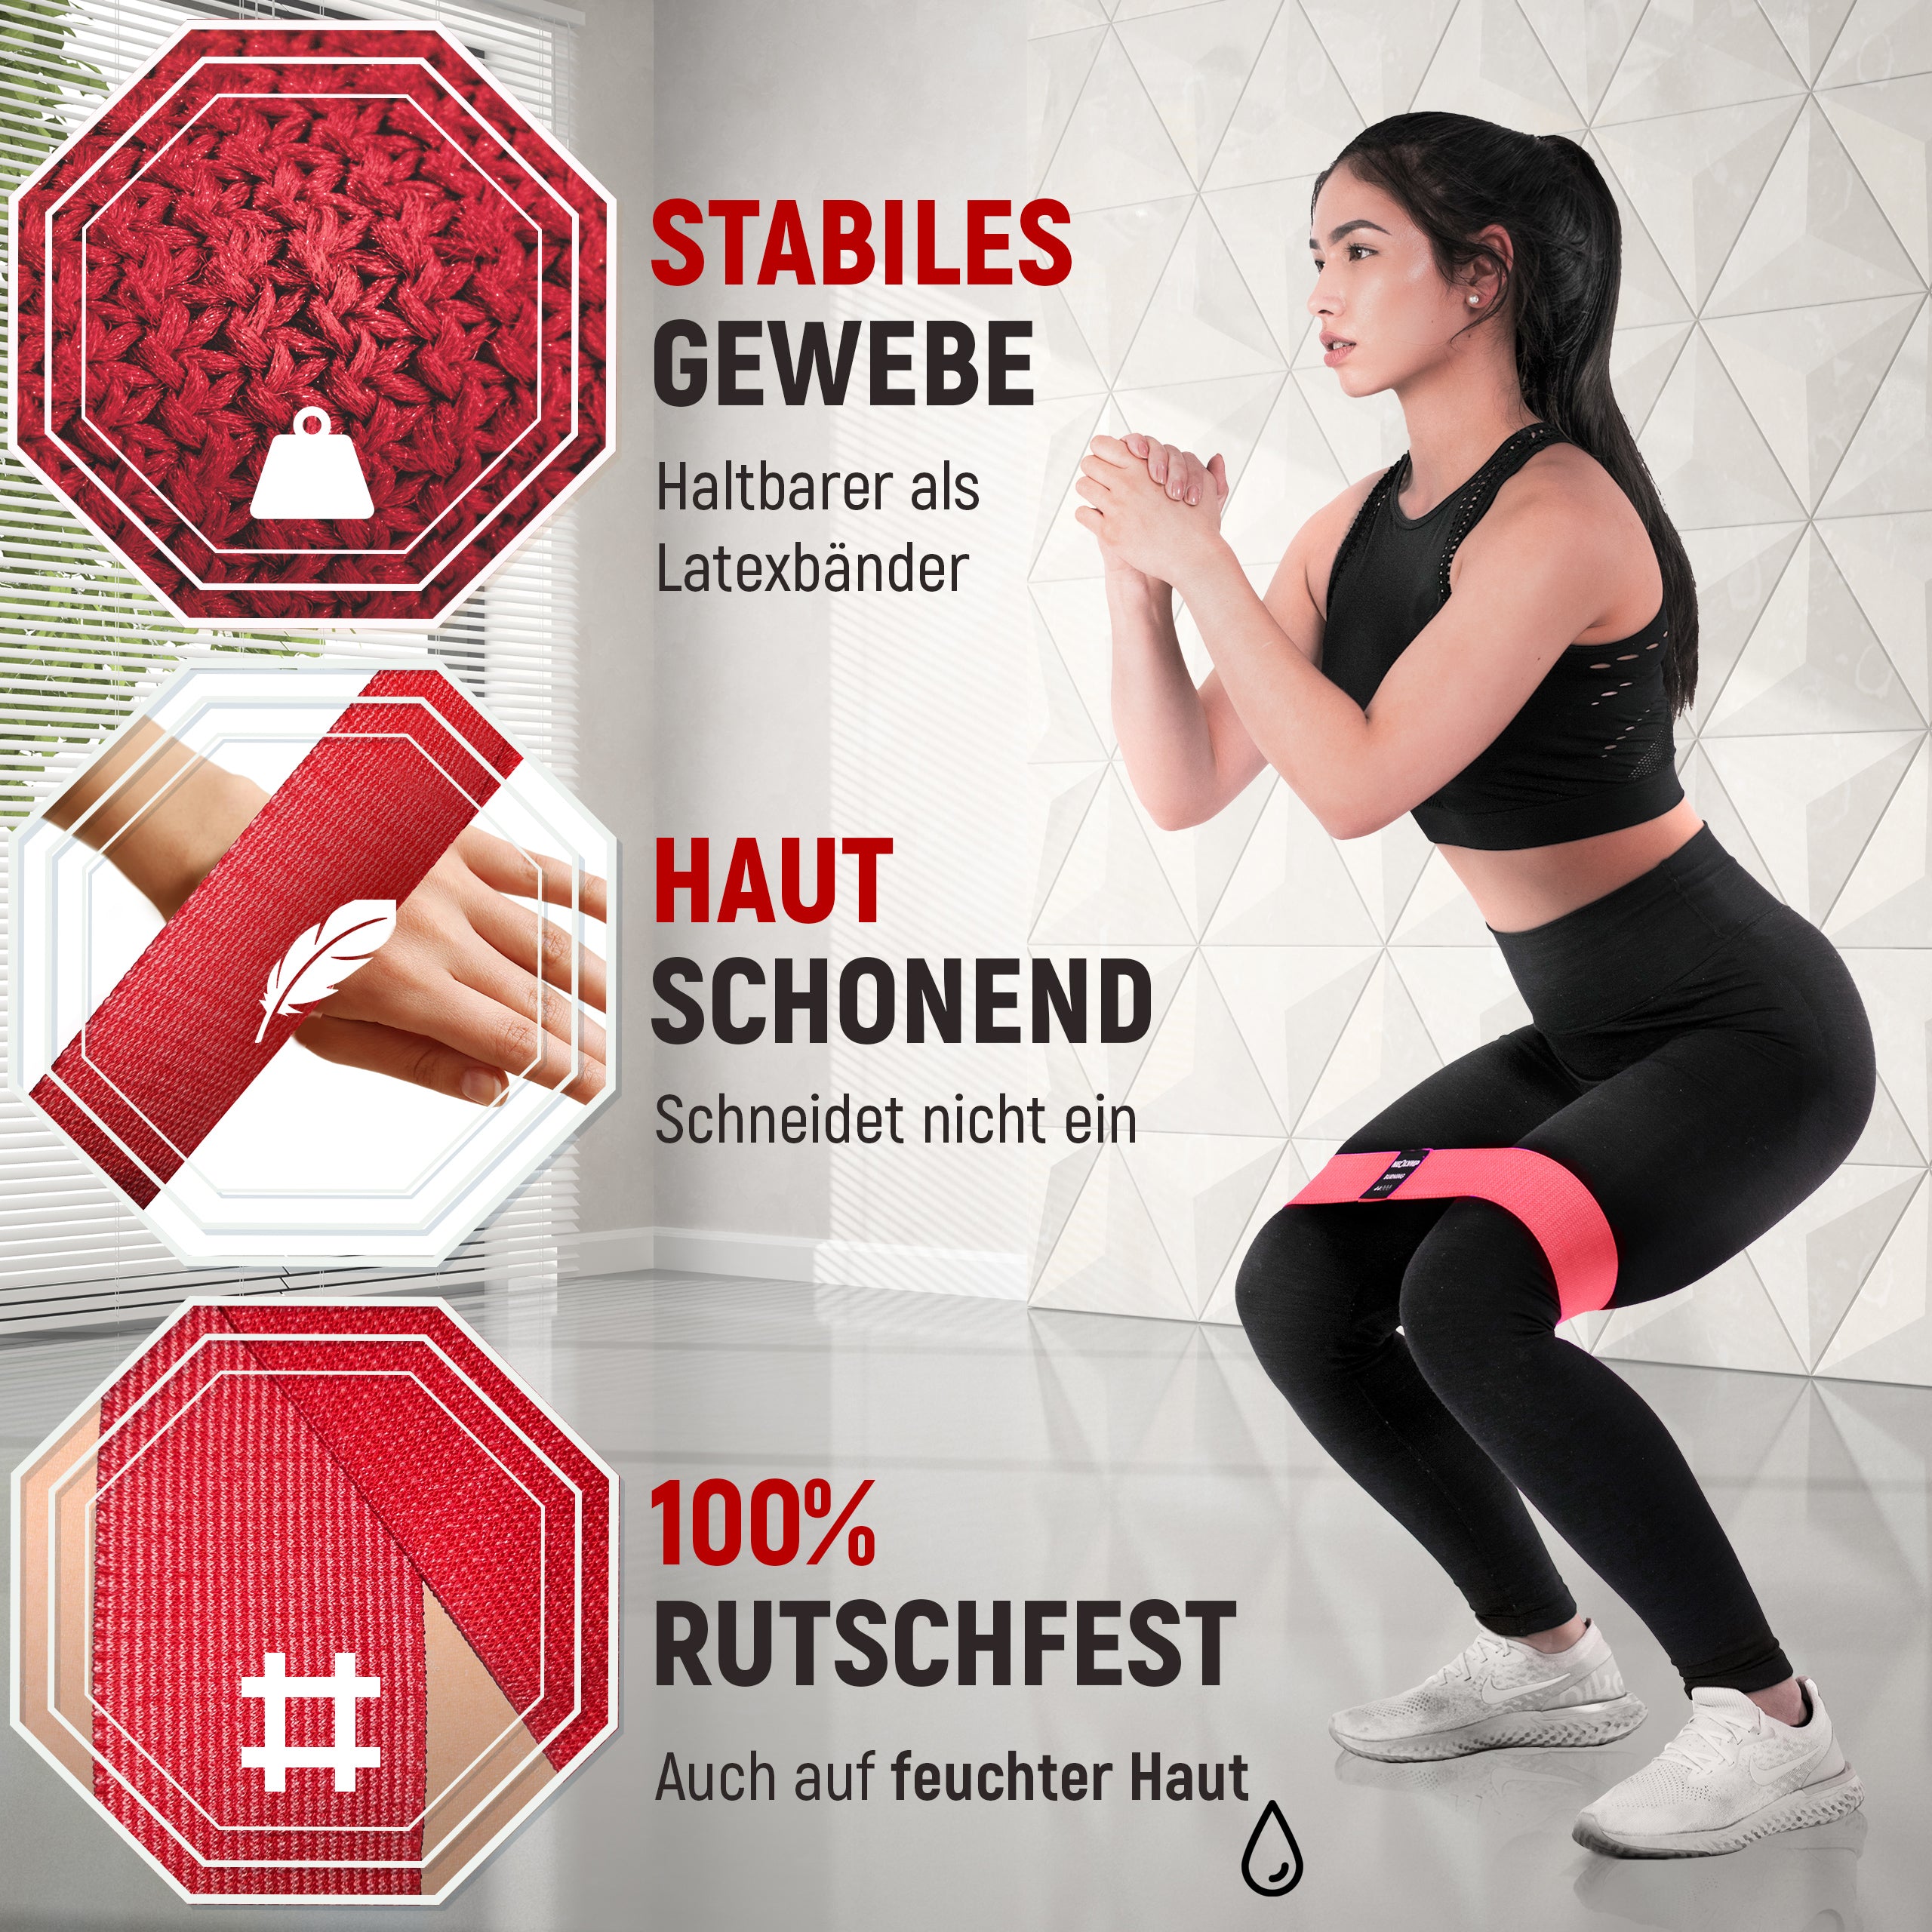 Short fabric fitness bands (levels 1-5)